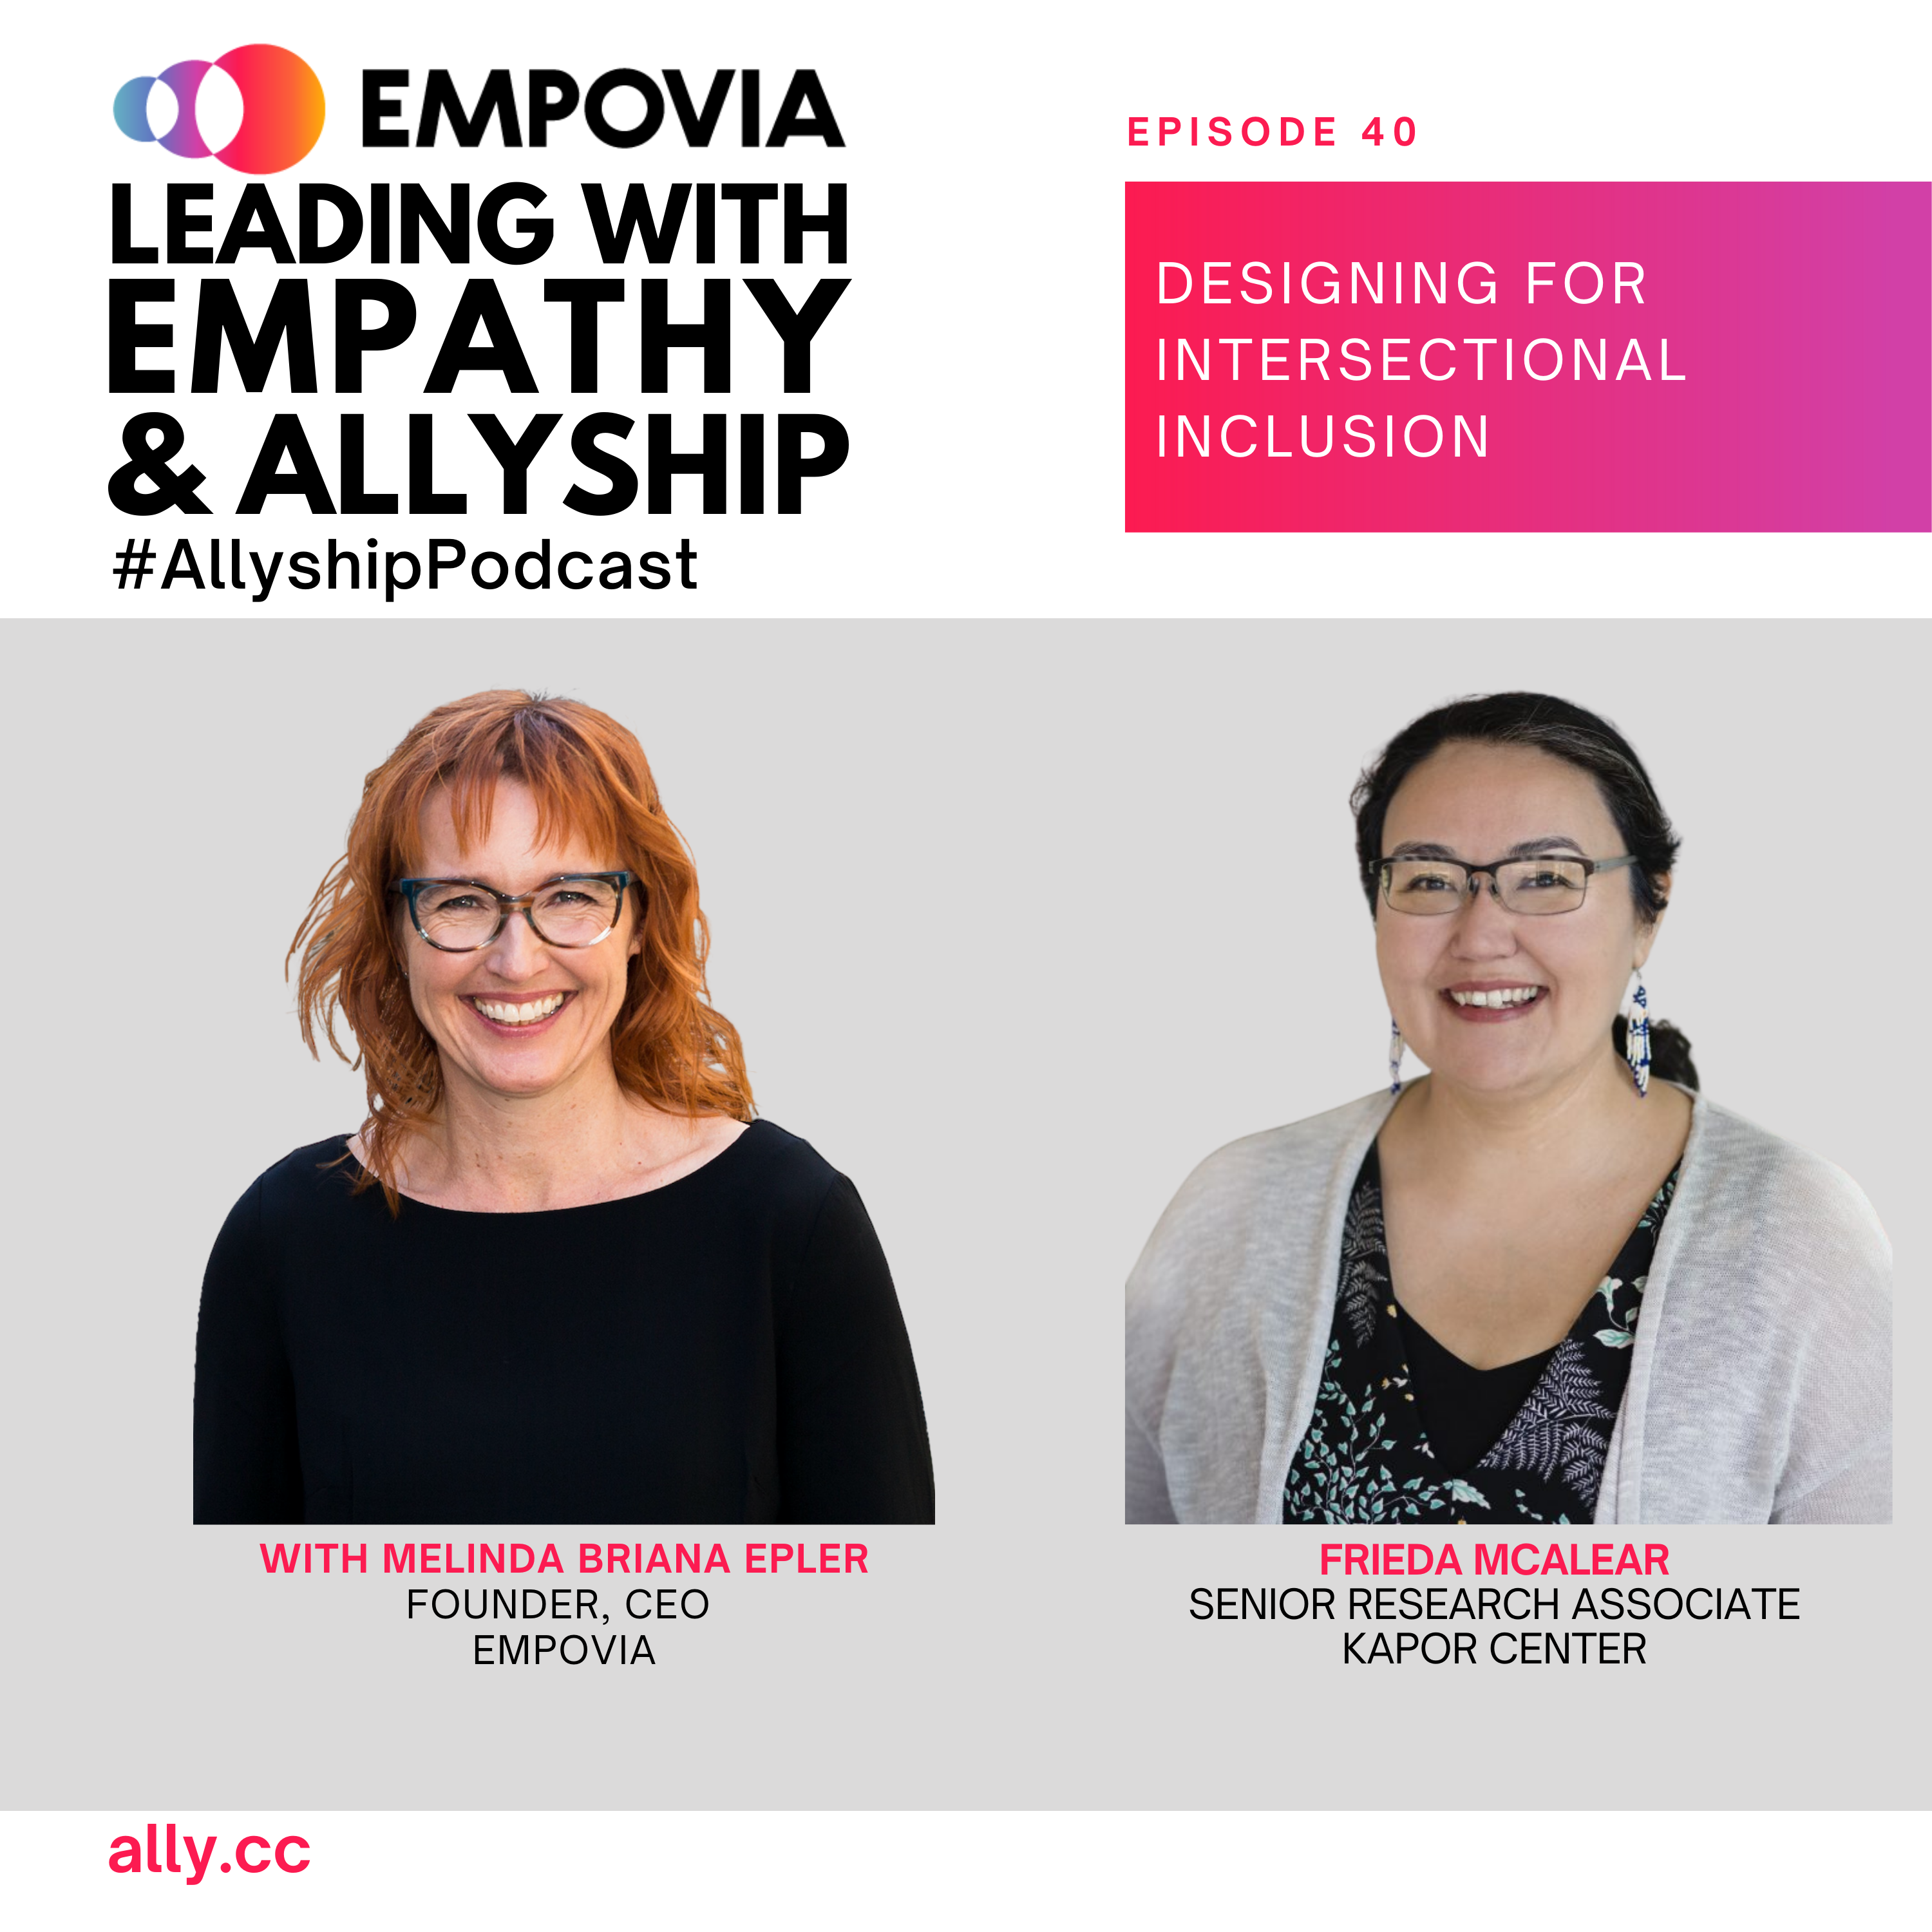 Leading With Empathy & Allyship promo with the Empovia logo and photos of host Melinda Briana Epler, a White woman with red hair and glasses, and Frieda McAlear, an Indigenous woman with brown hair, glasses, and dangling earrings.